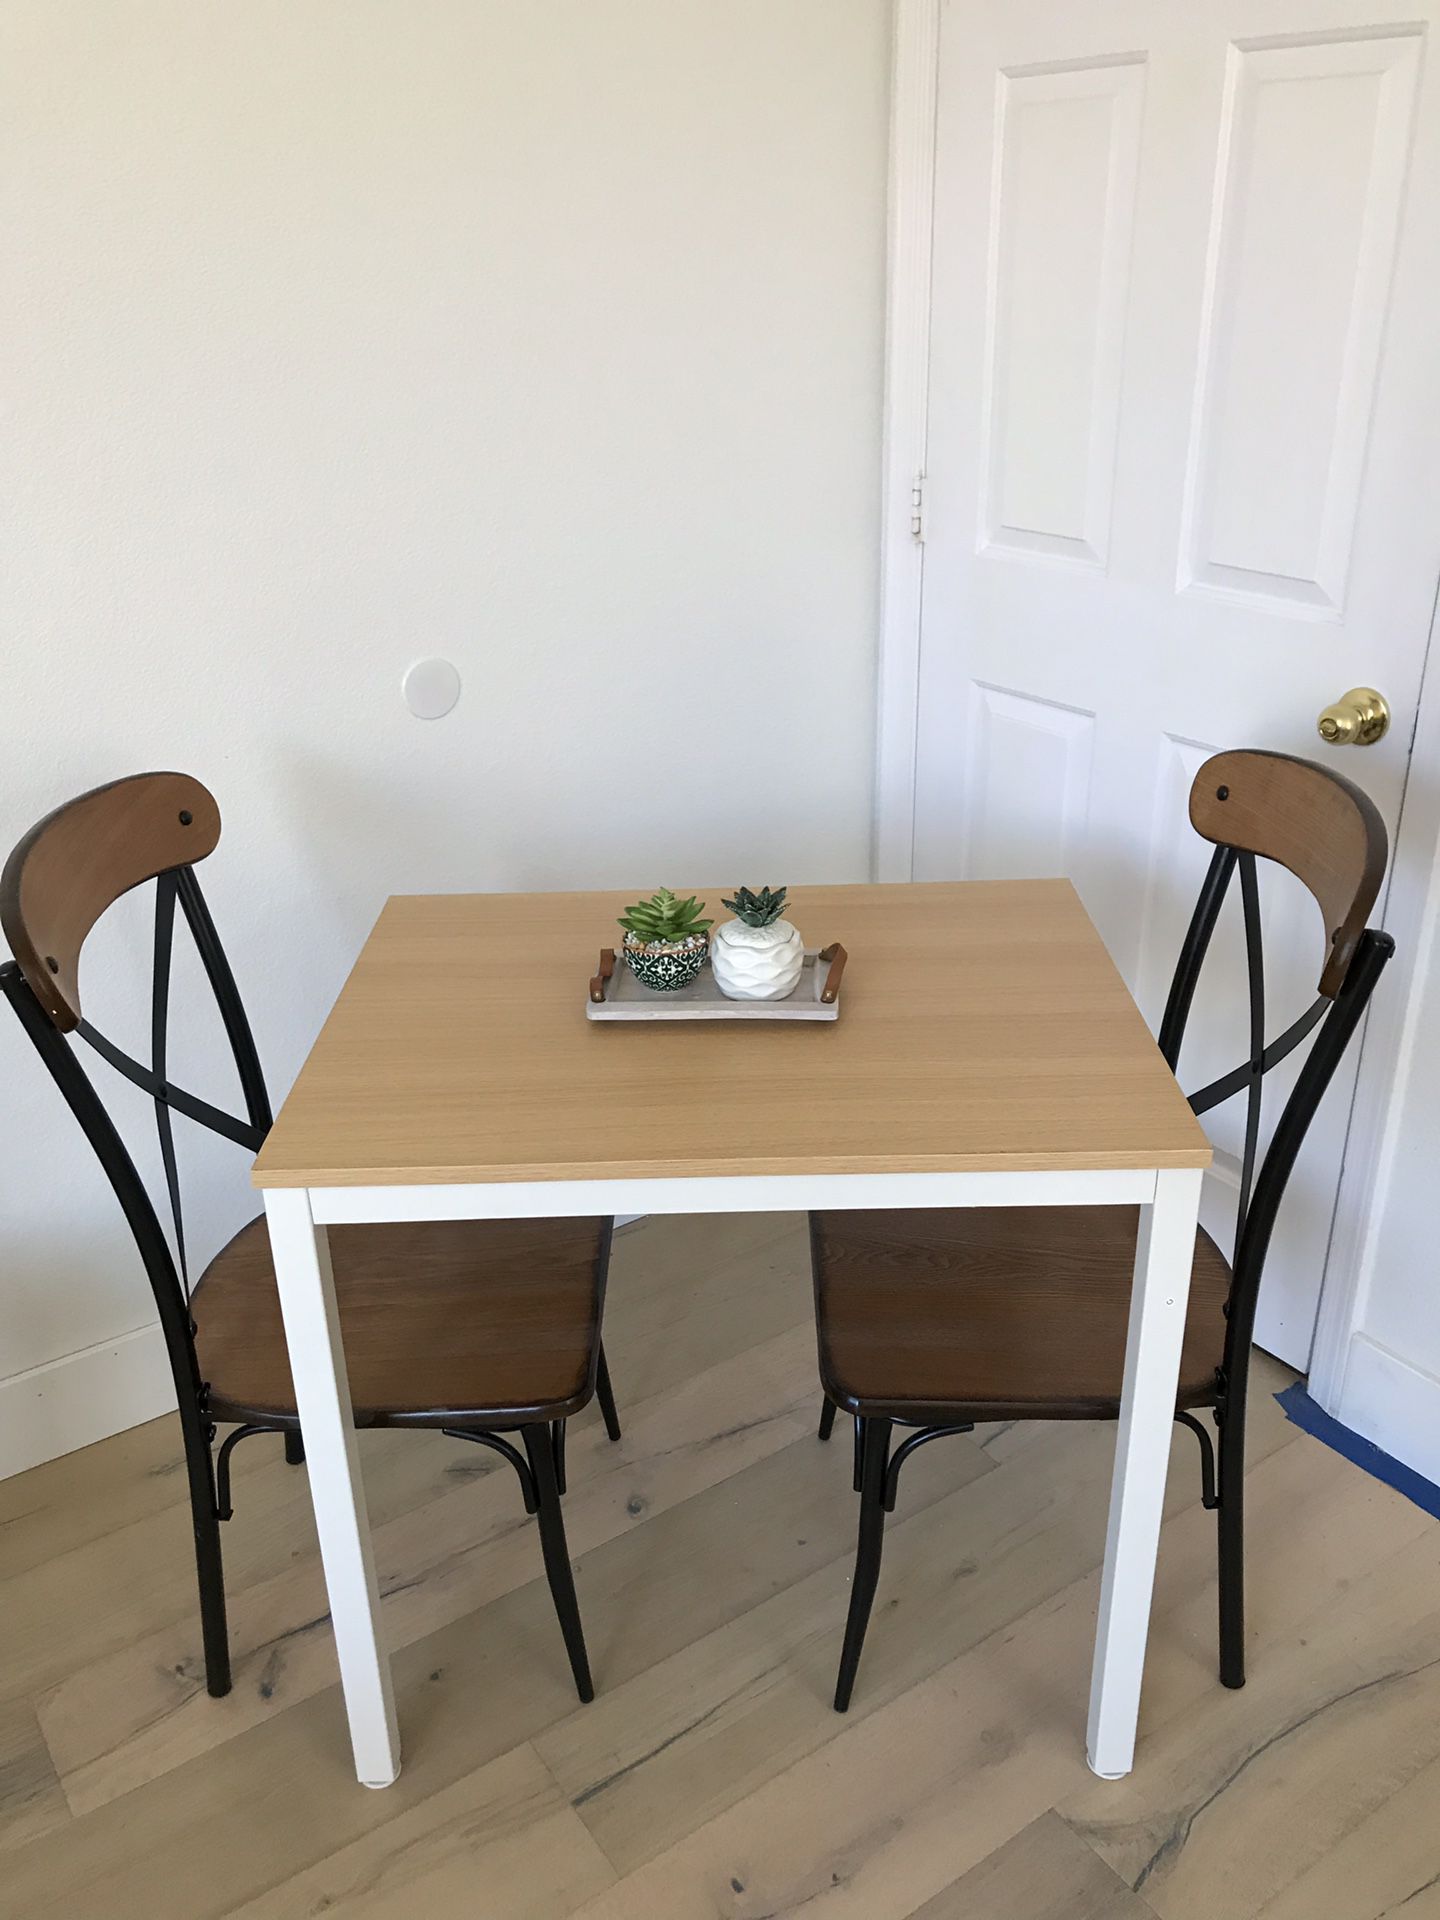 Small dining table with 2 chairs